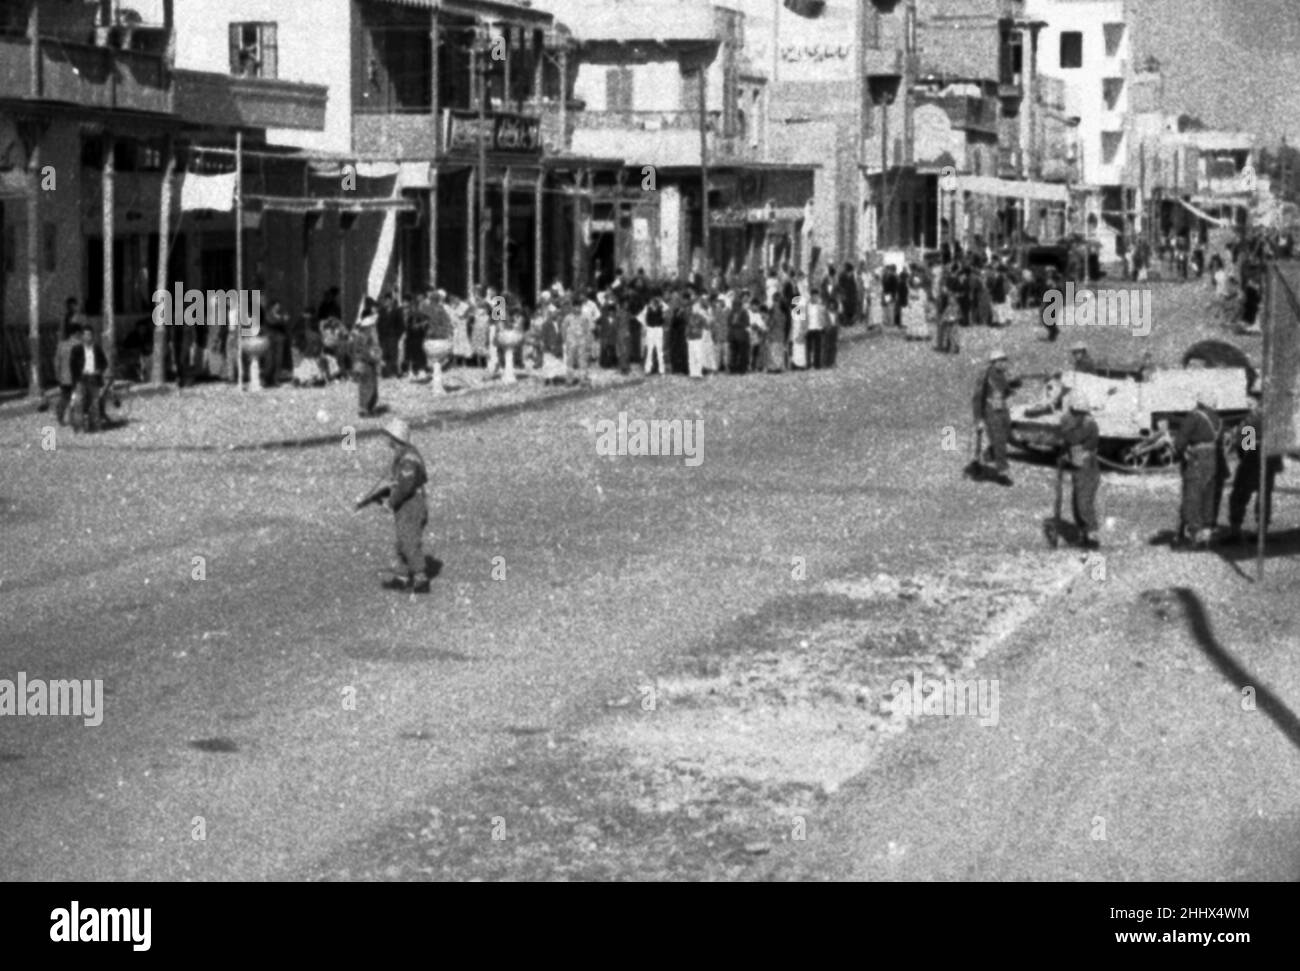 Aftermath of the Ismalia Riots 27th January 1952. The Ismalia riots represented a major clash between British Forces and Egyptian auxiliary police in Ismailia, Egypt.  Ismailia is located on Lake Timsah along the coast of the Canal, half-way between Port Said and Suez.   In presend day, The Ismailia Governorate is the capital of the Canal region where the Suez Canal Authority has its headquarters. Stock Photo